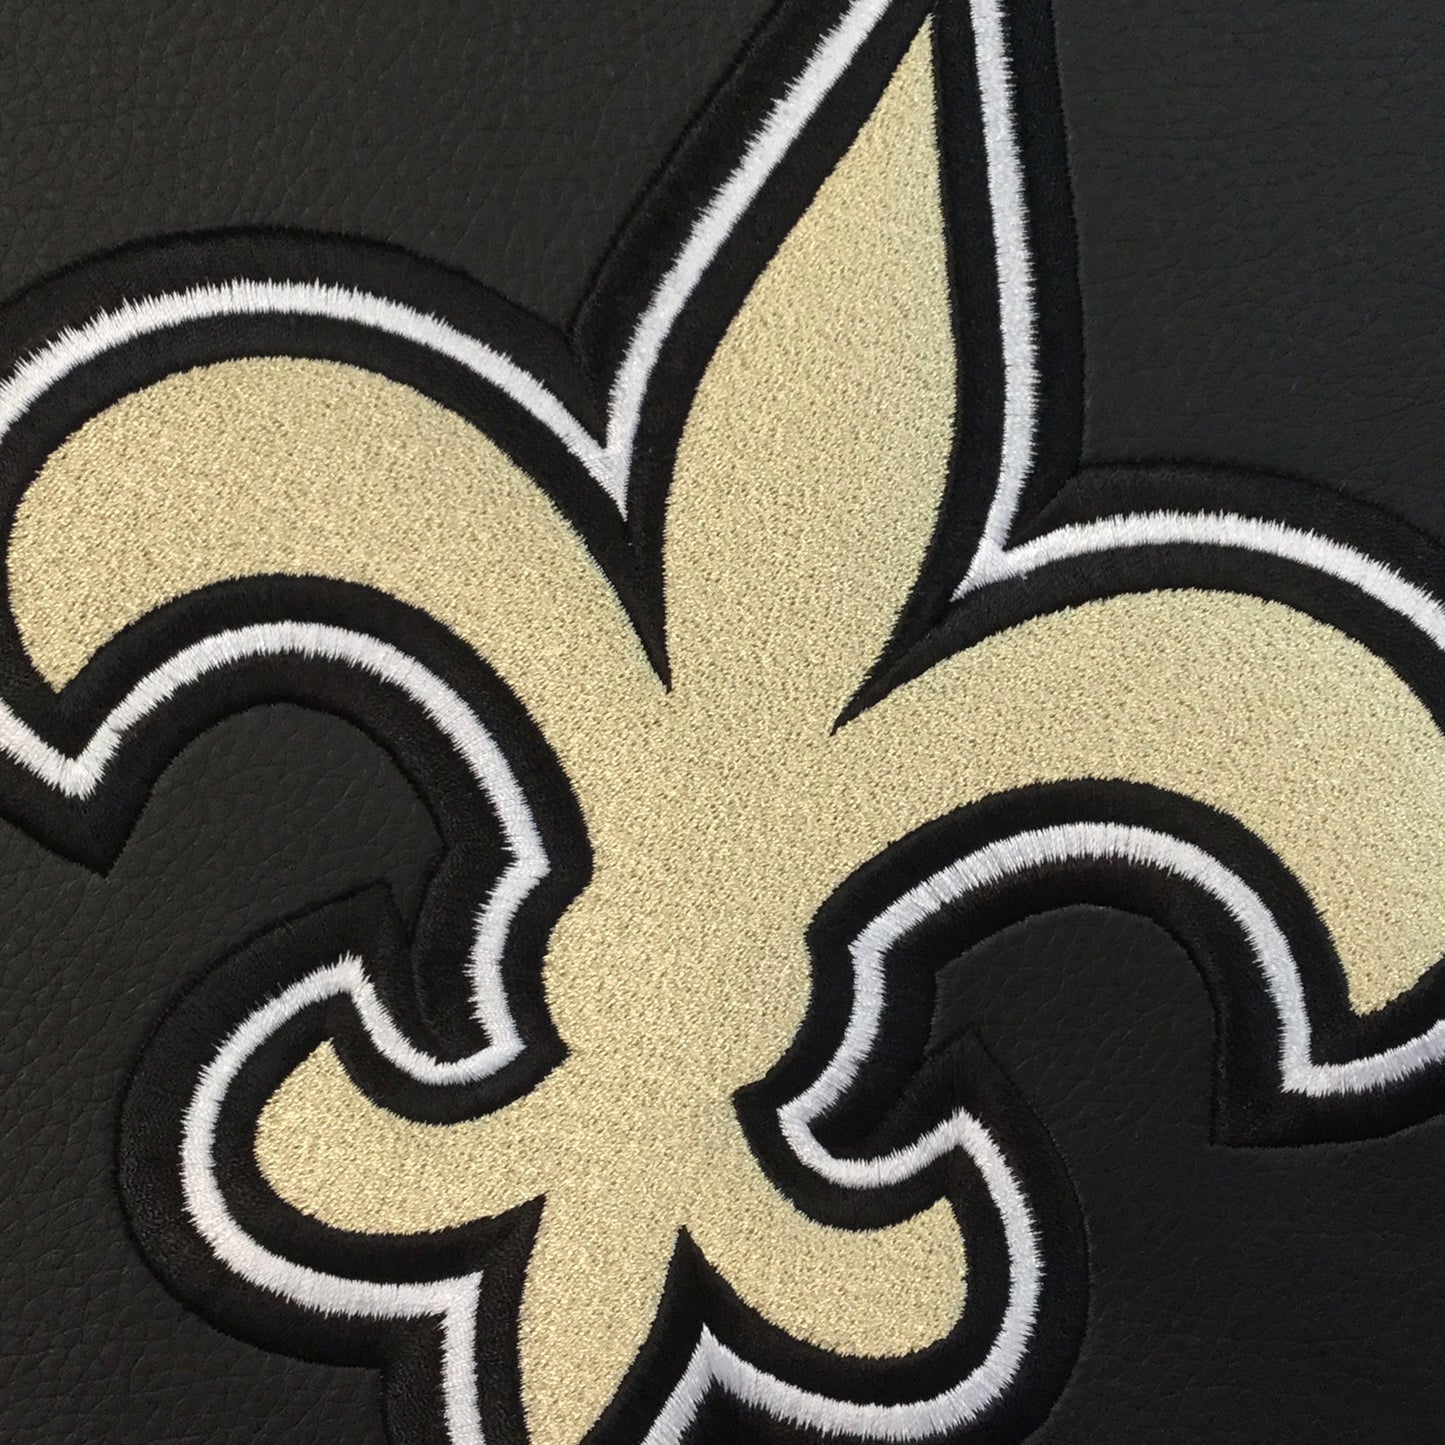 Xpression Pro Gaming Chair with  New Orleans Saints Primary Logo